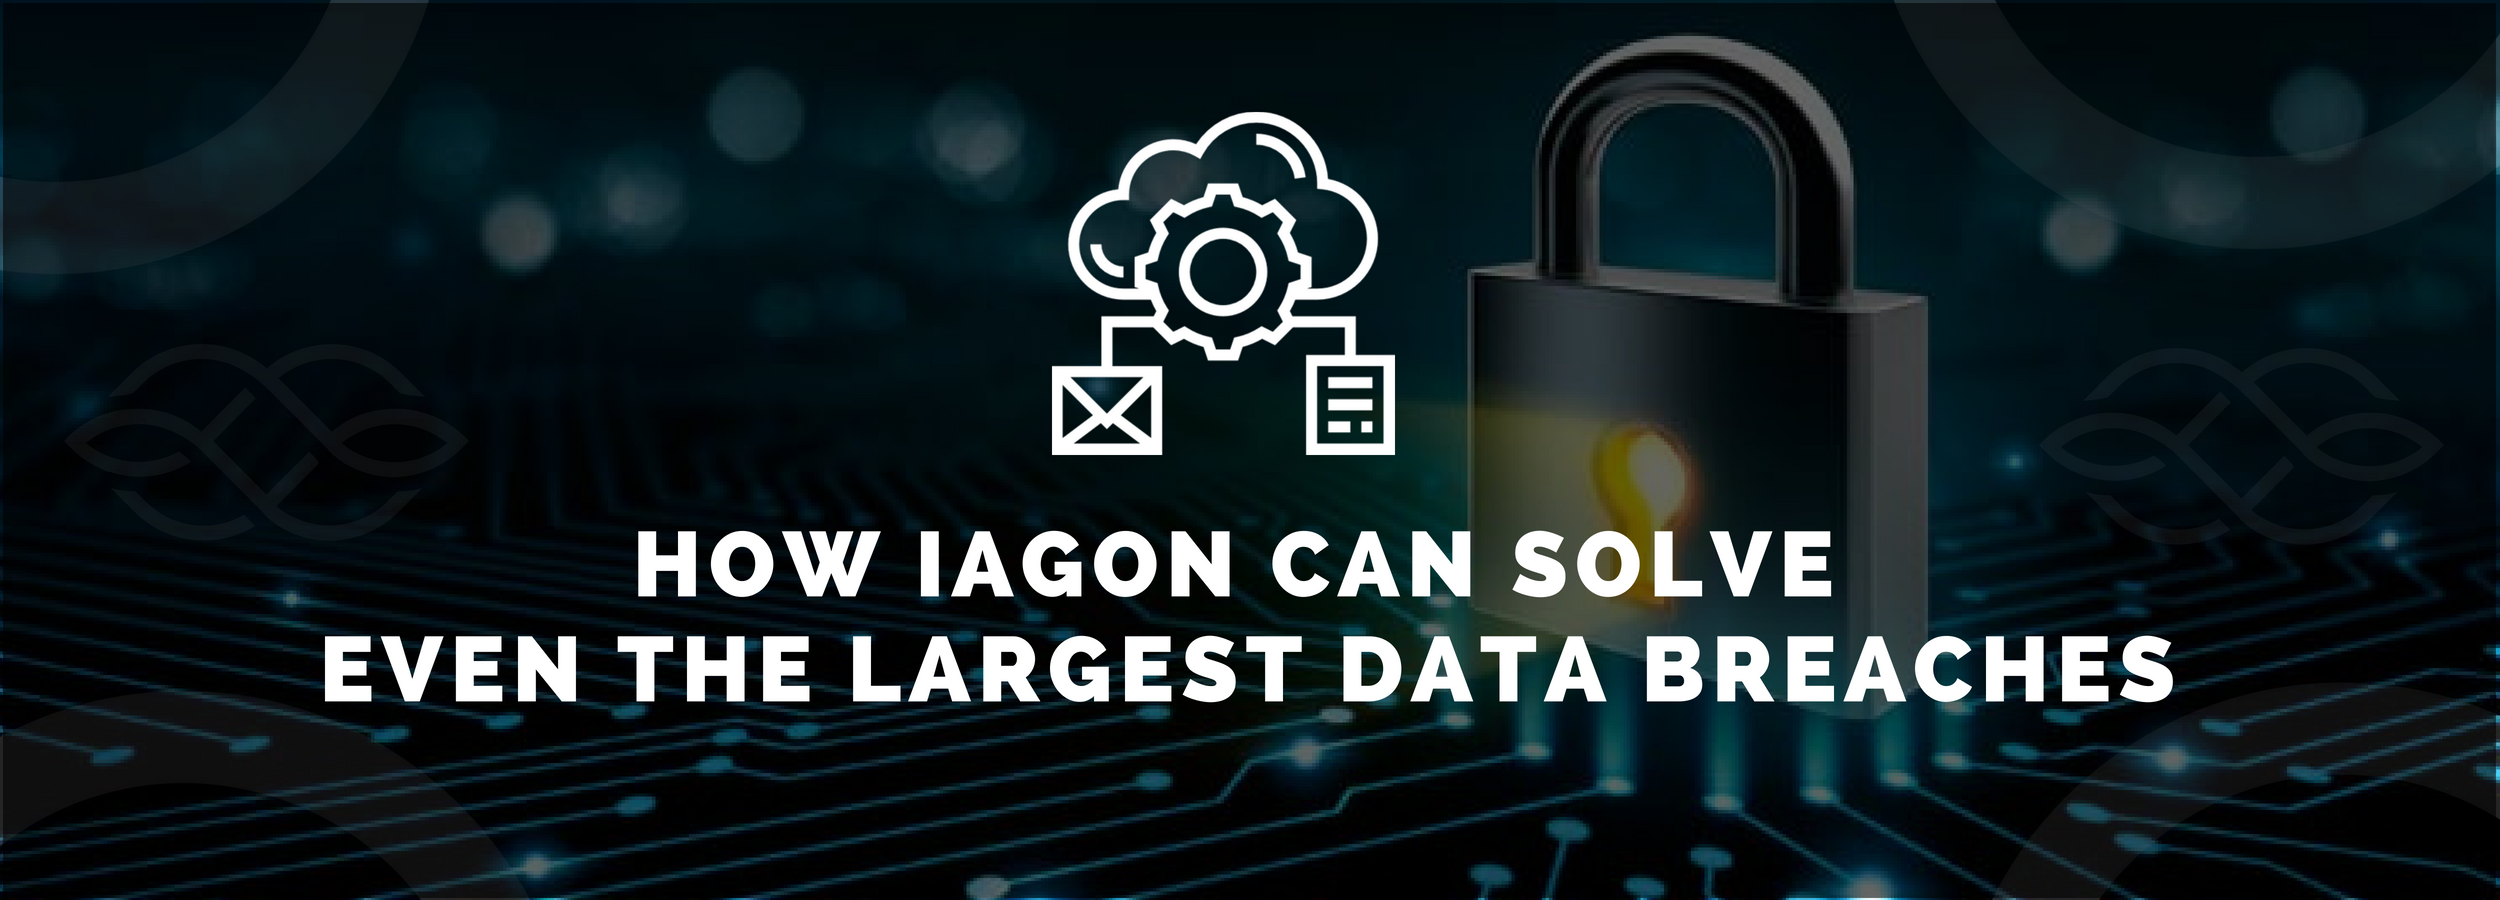 How IAGON Can Solve Even The Largest Data Breaches